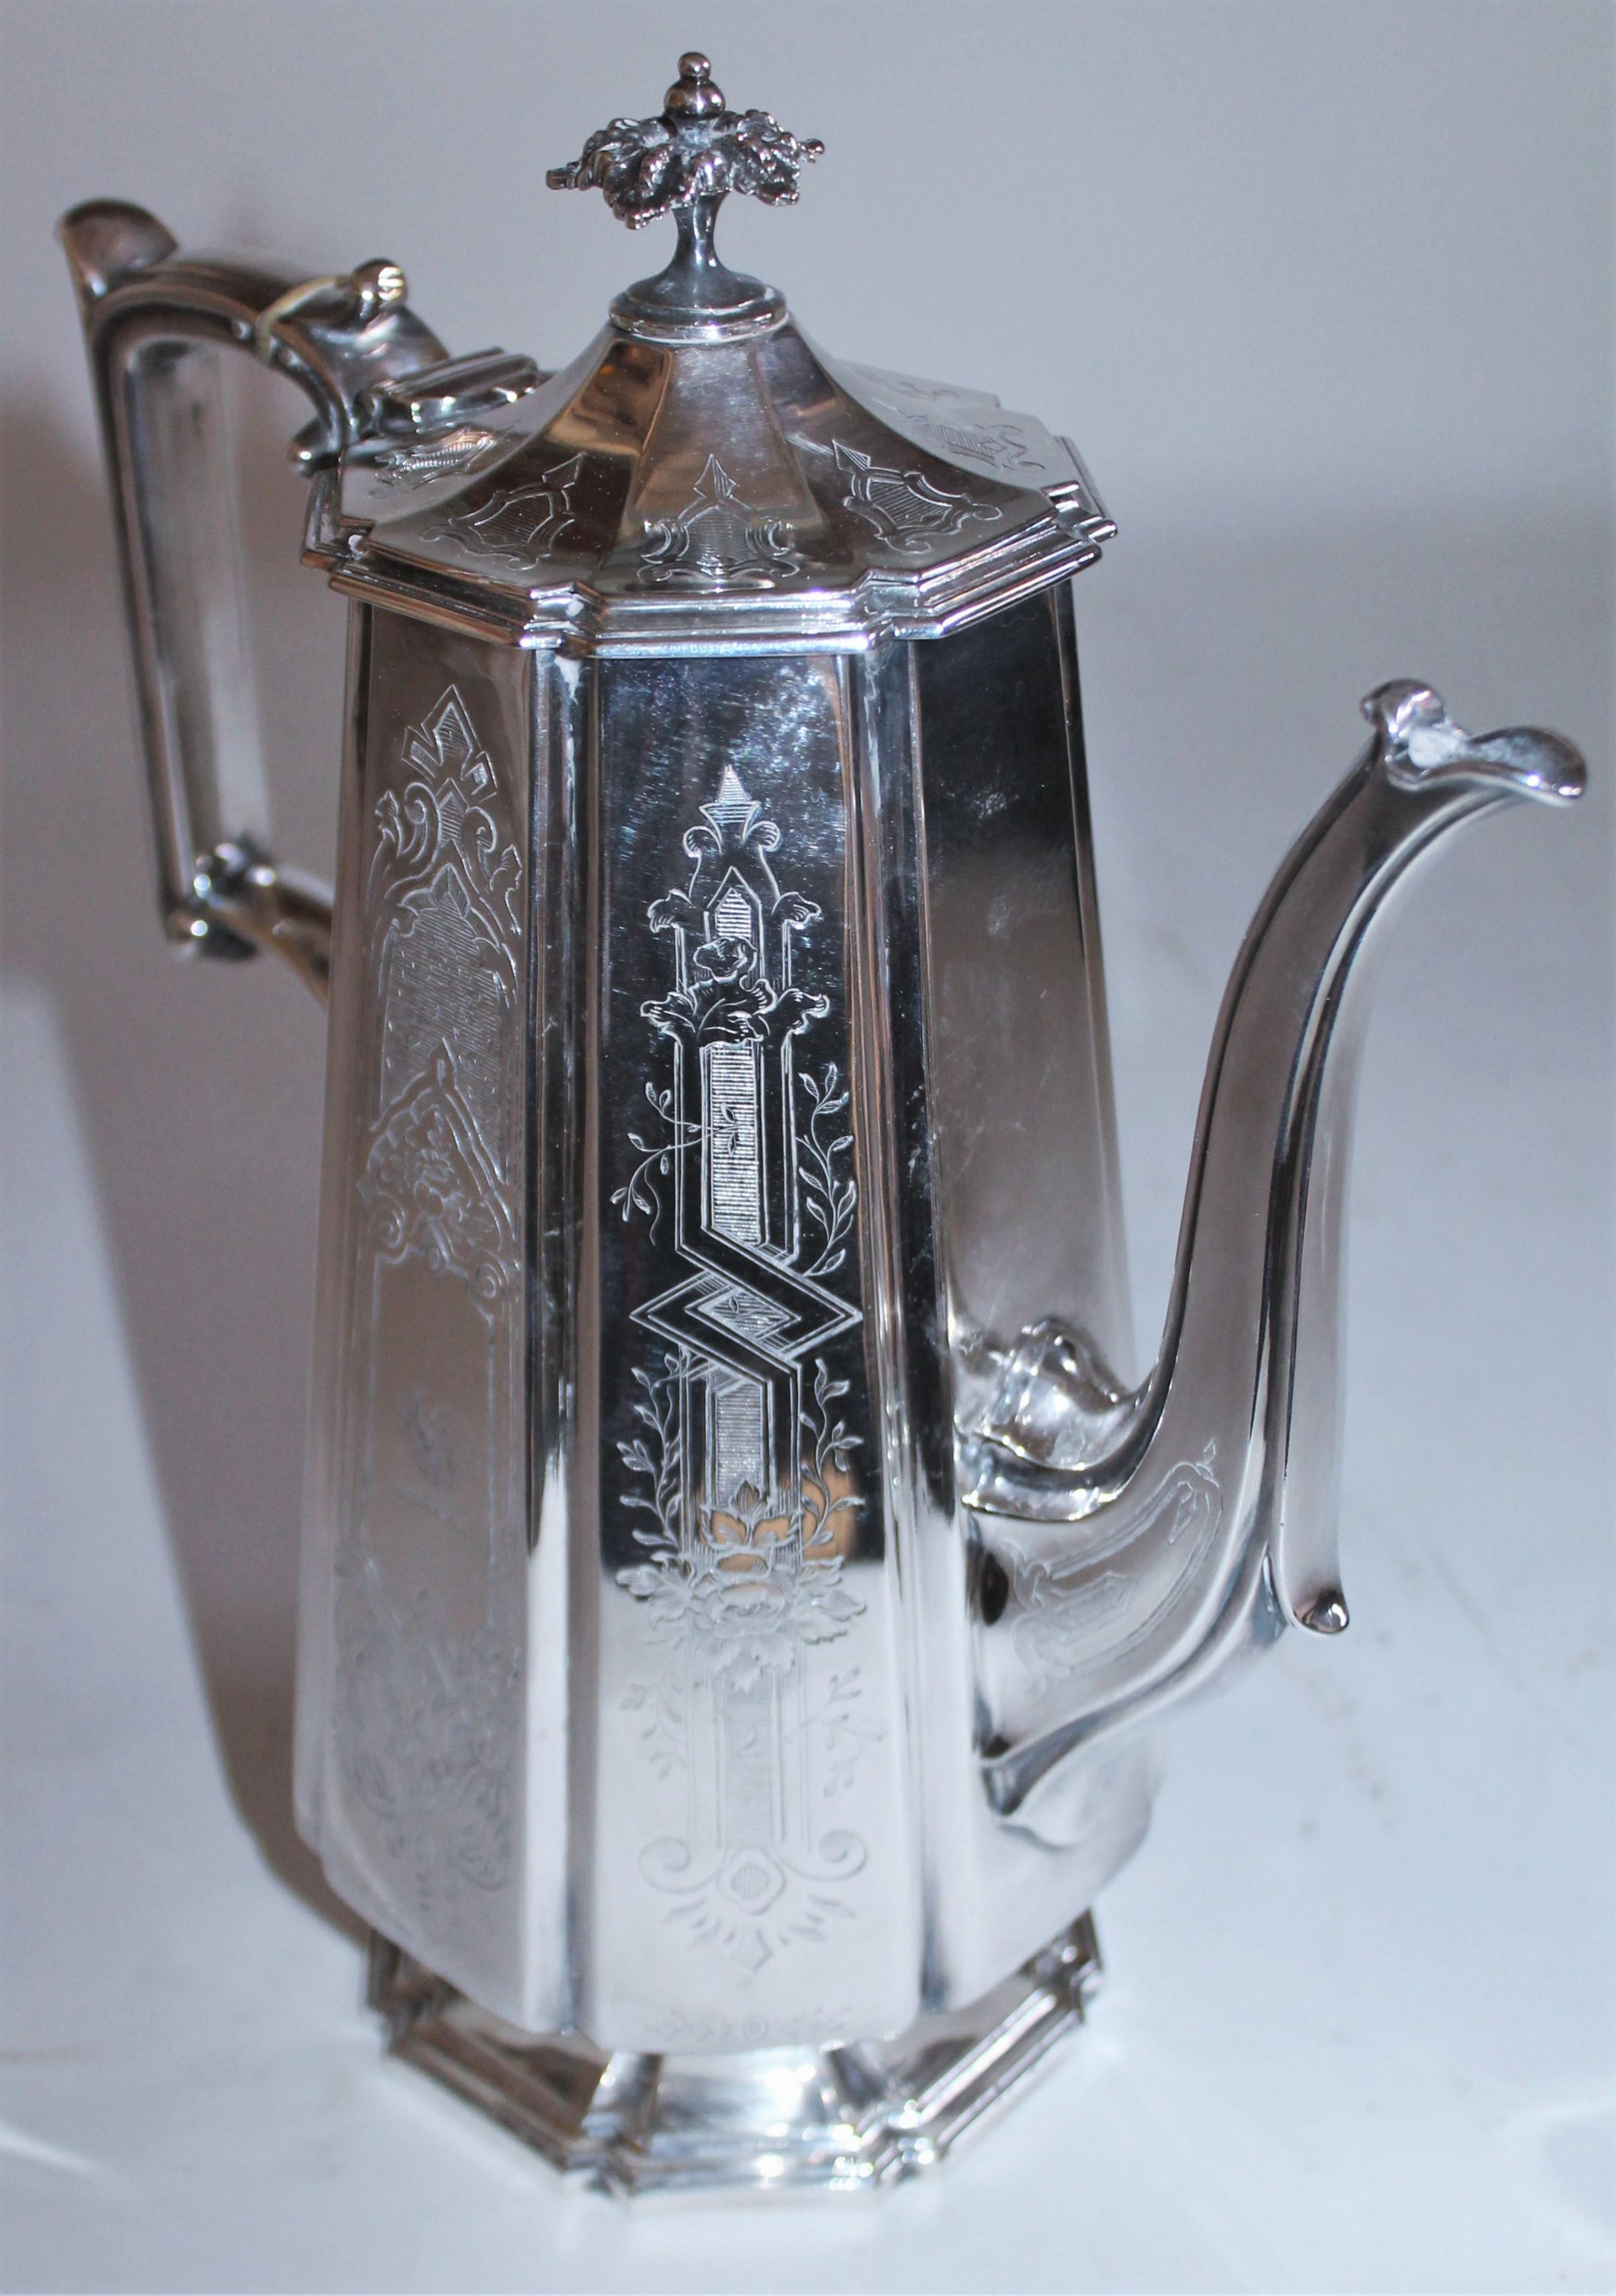 This fine handcrafted coffee pot is in fine condition with detailed hall marks on the bottom and fine lines. The condition is mint.
Elkington & Co electroplate with Elkington’s own date code for 1800s.

Letter 